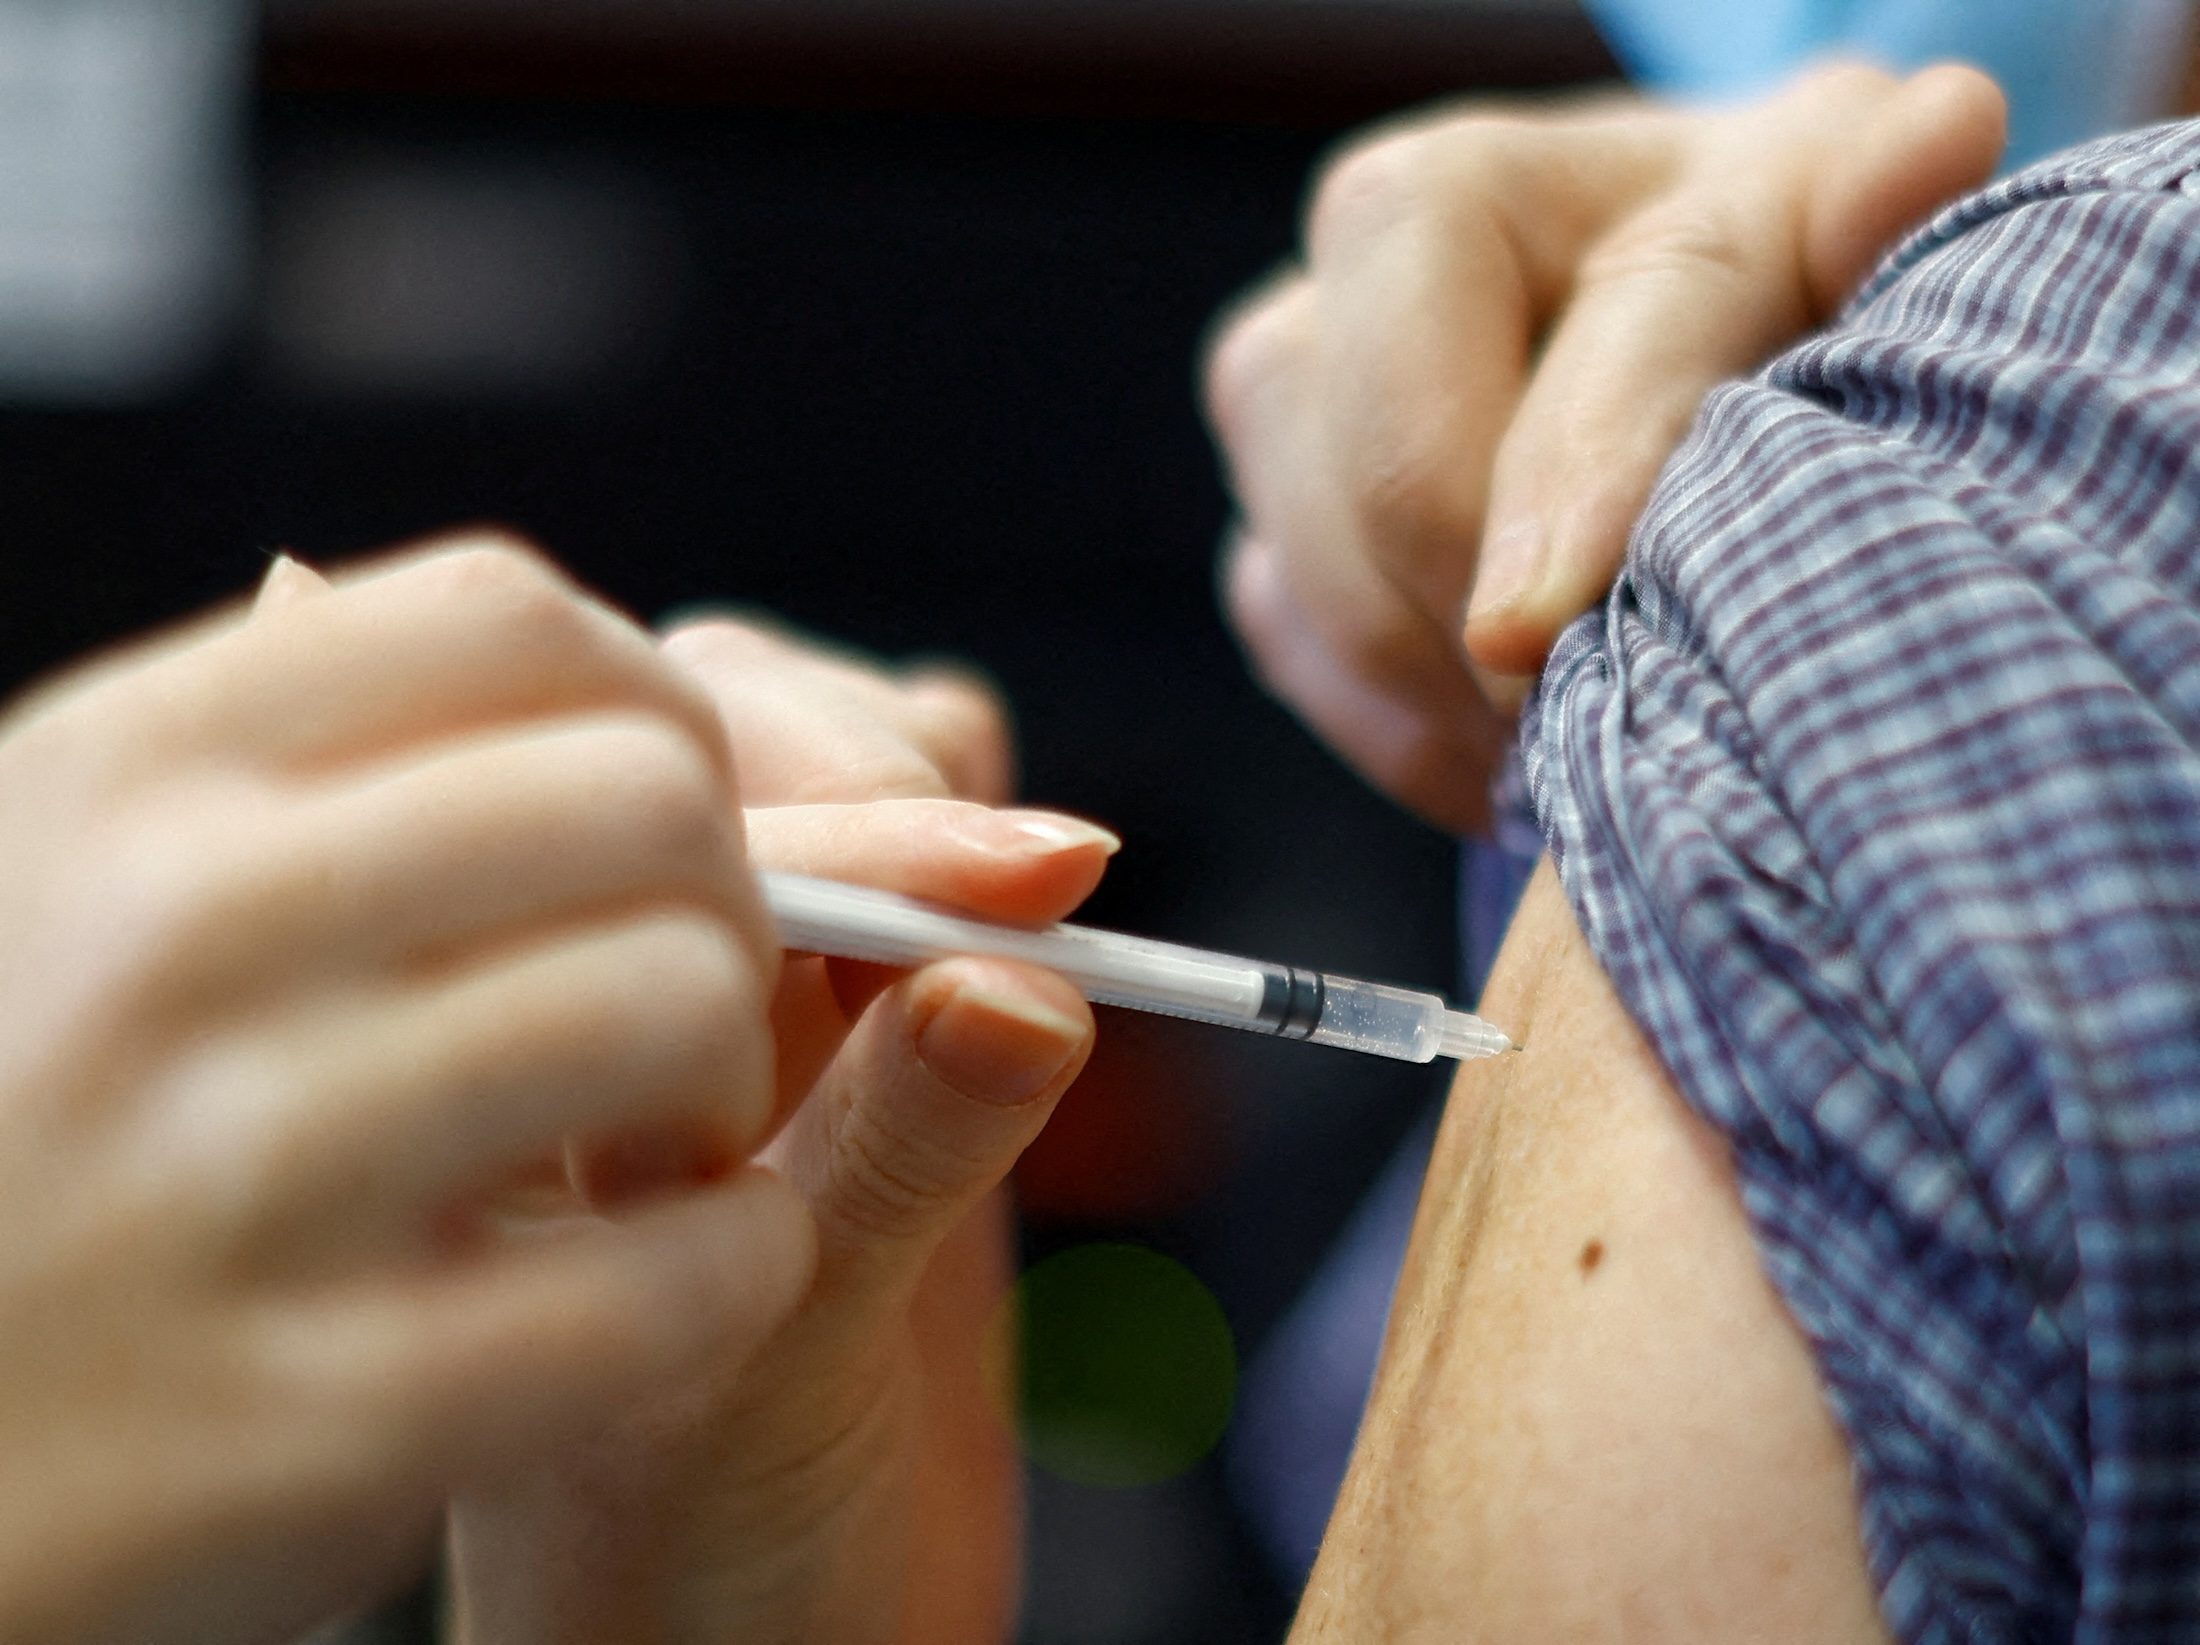 WHO sees ‘incredibly low’ COVID, flu vaccination rates as cases surge